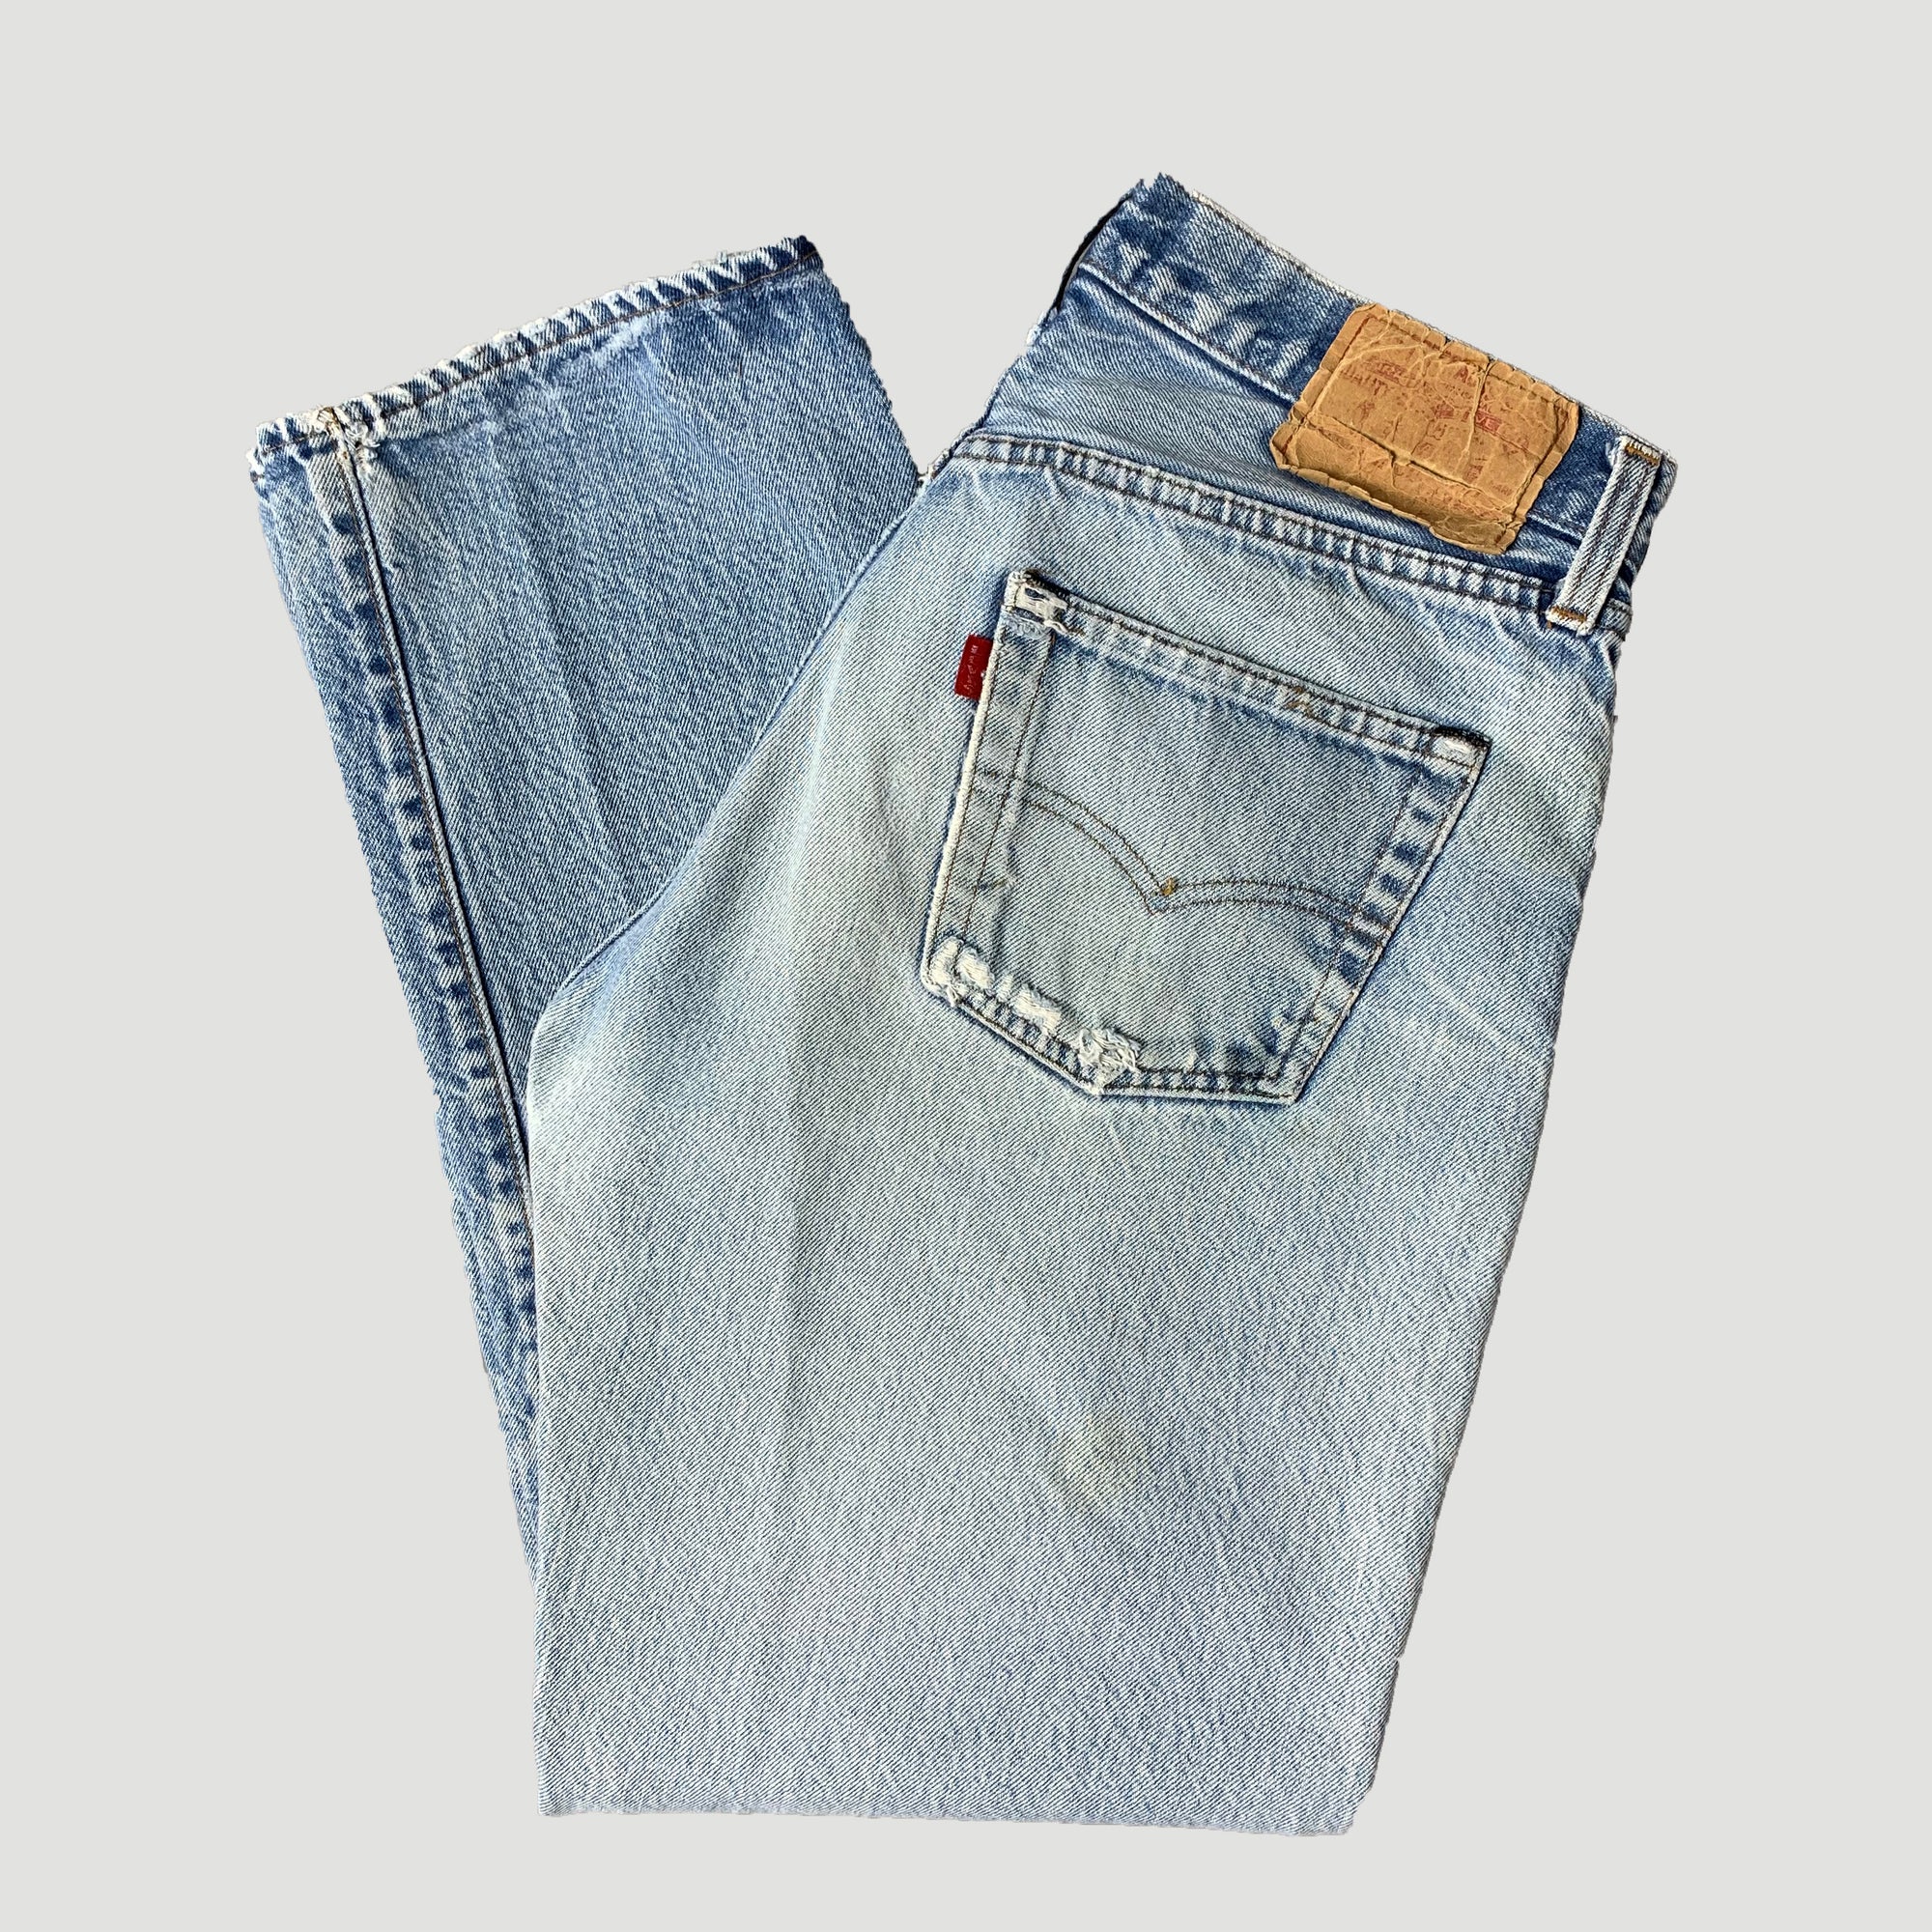 levi's red tab 501